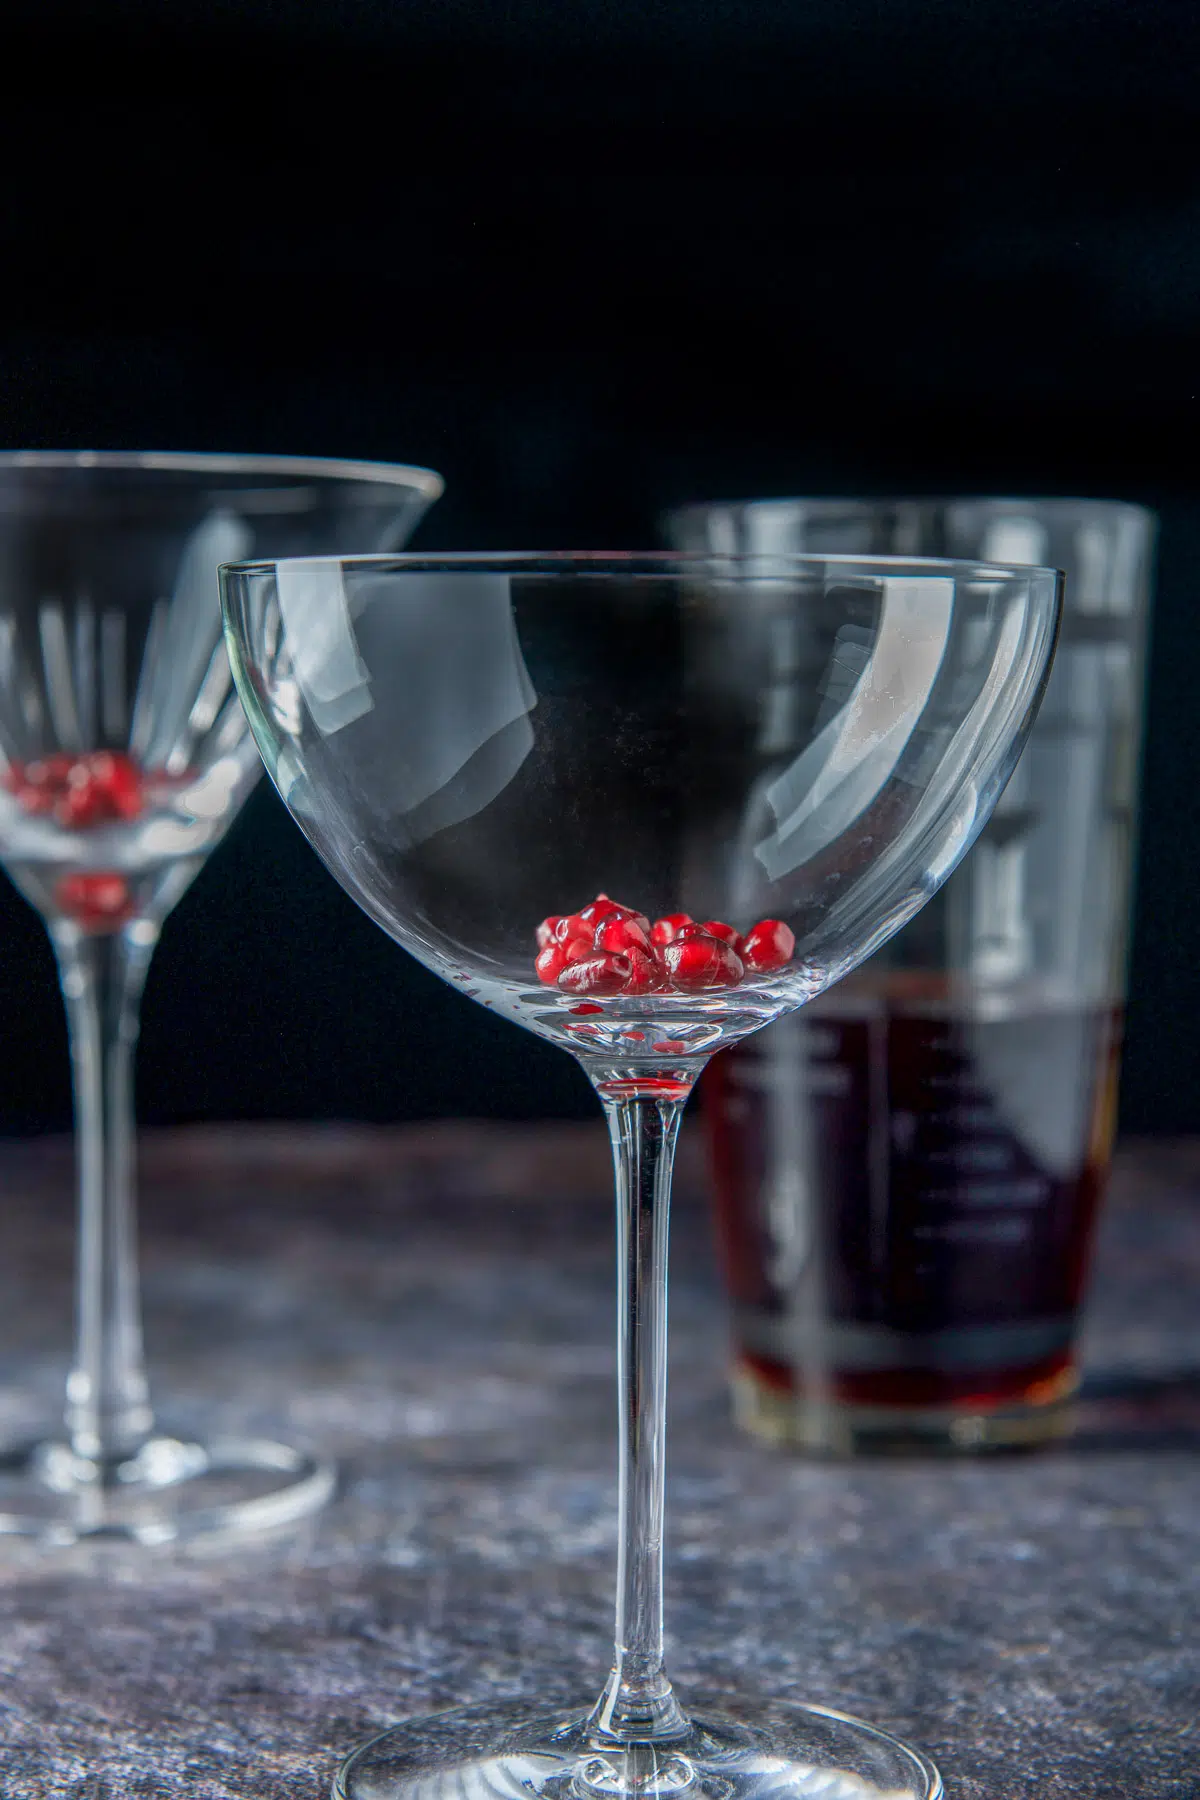 Two glasses with pomegranate seeds in them